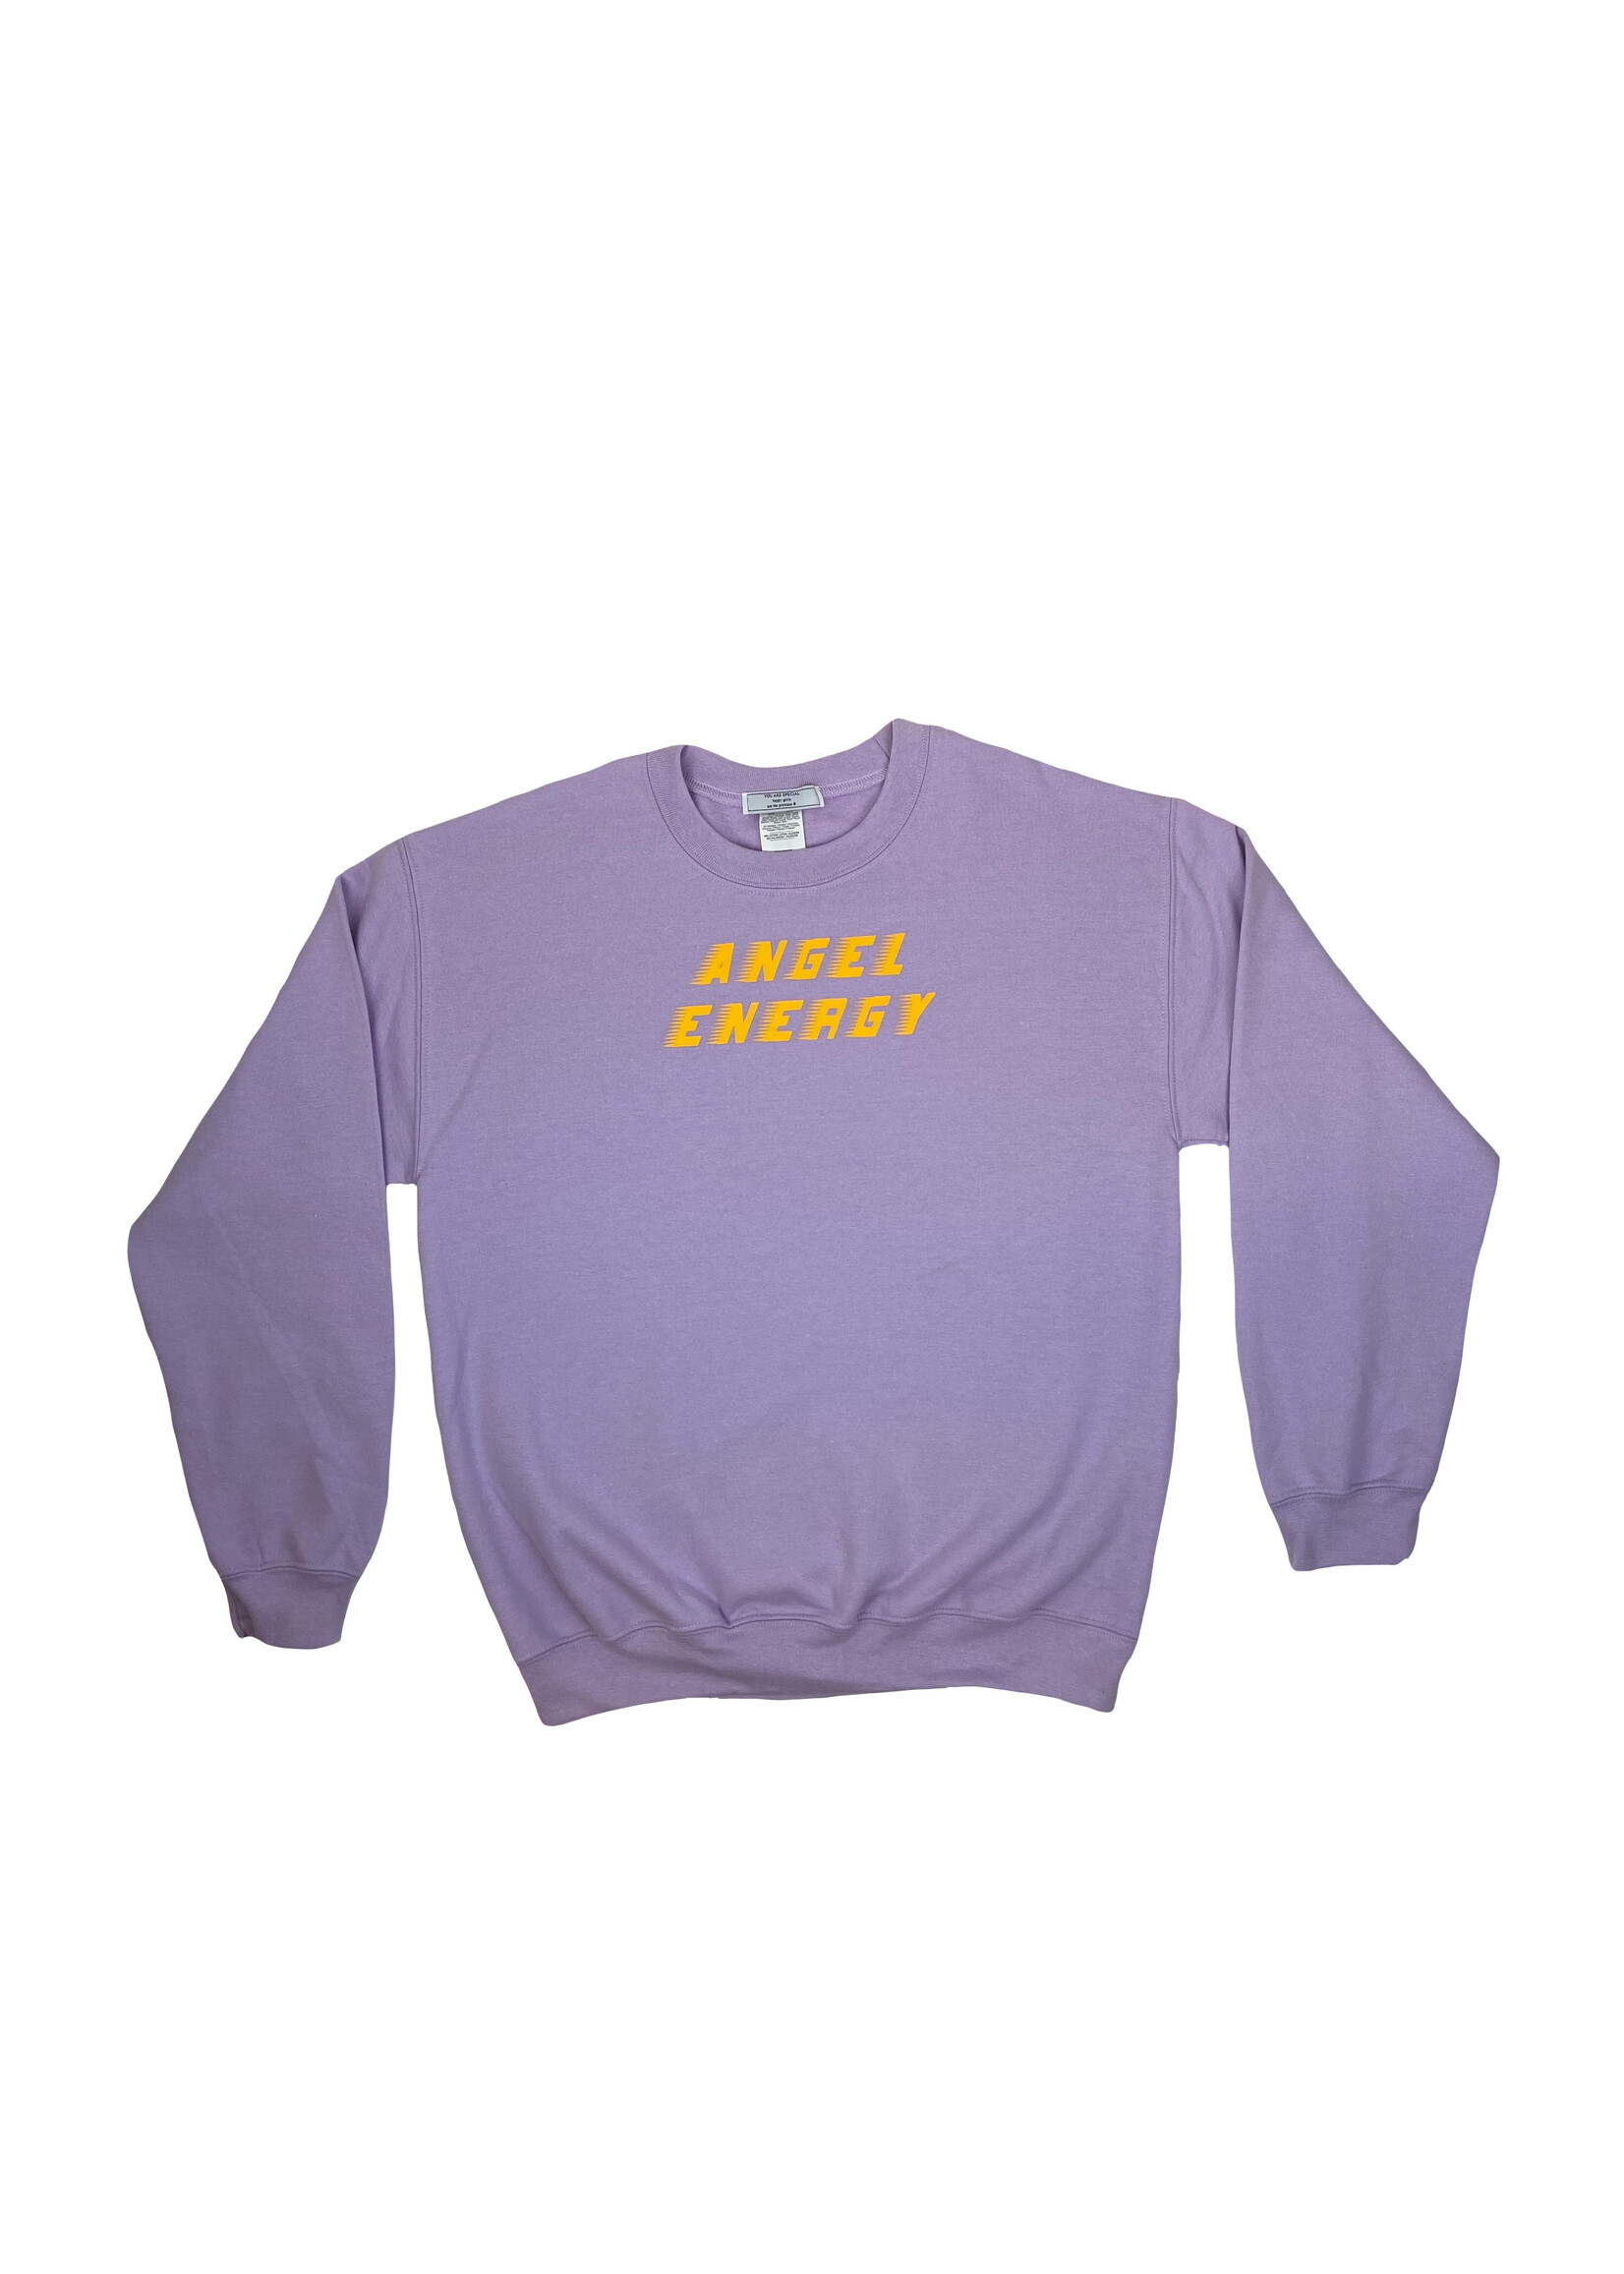 YOU ARE SPECIAL "Angel Energy" Orchid Sweater